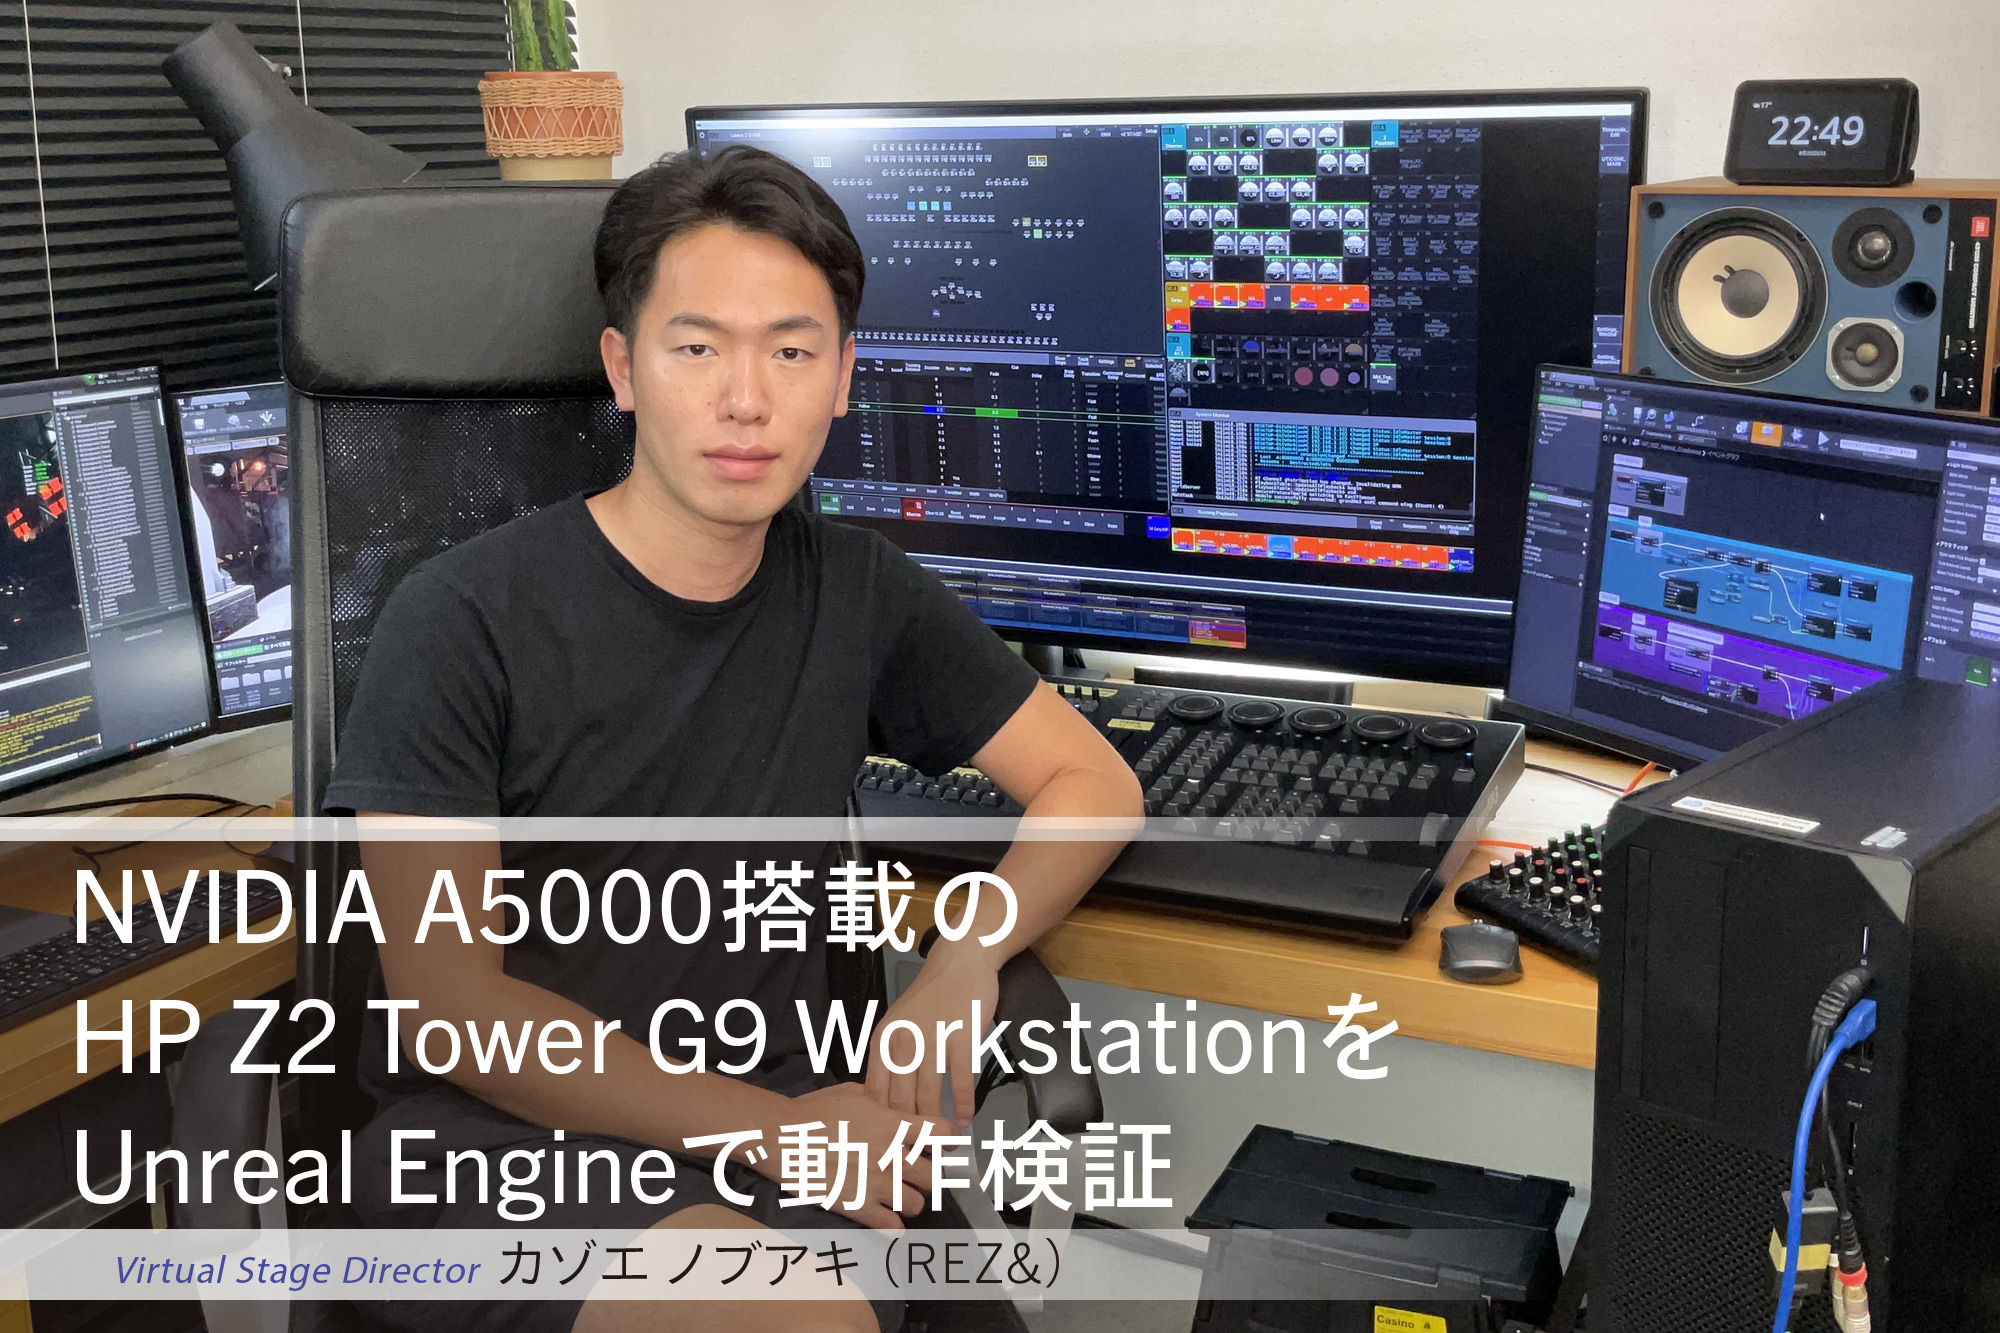 NVIDIA A5000搭載「HP Z2 Tower G9 Workstation」を Unreal Engineで 